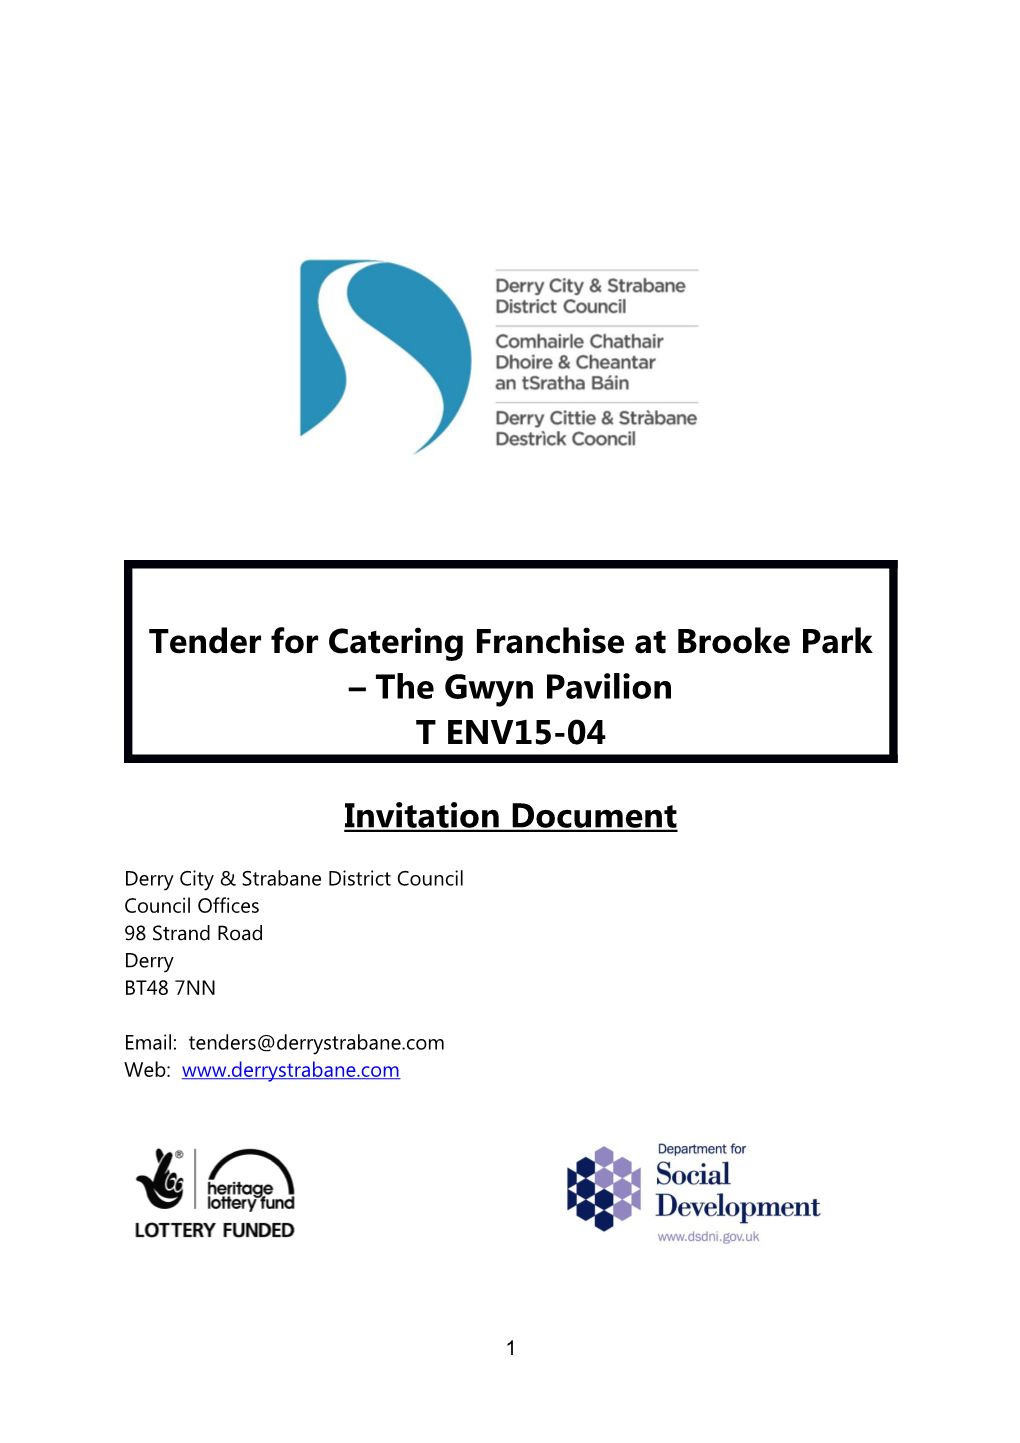 Tender for Catering Franchise at Brooke Park the Gwyn Pavilion